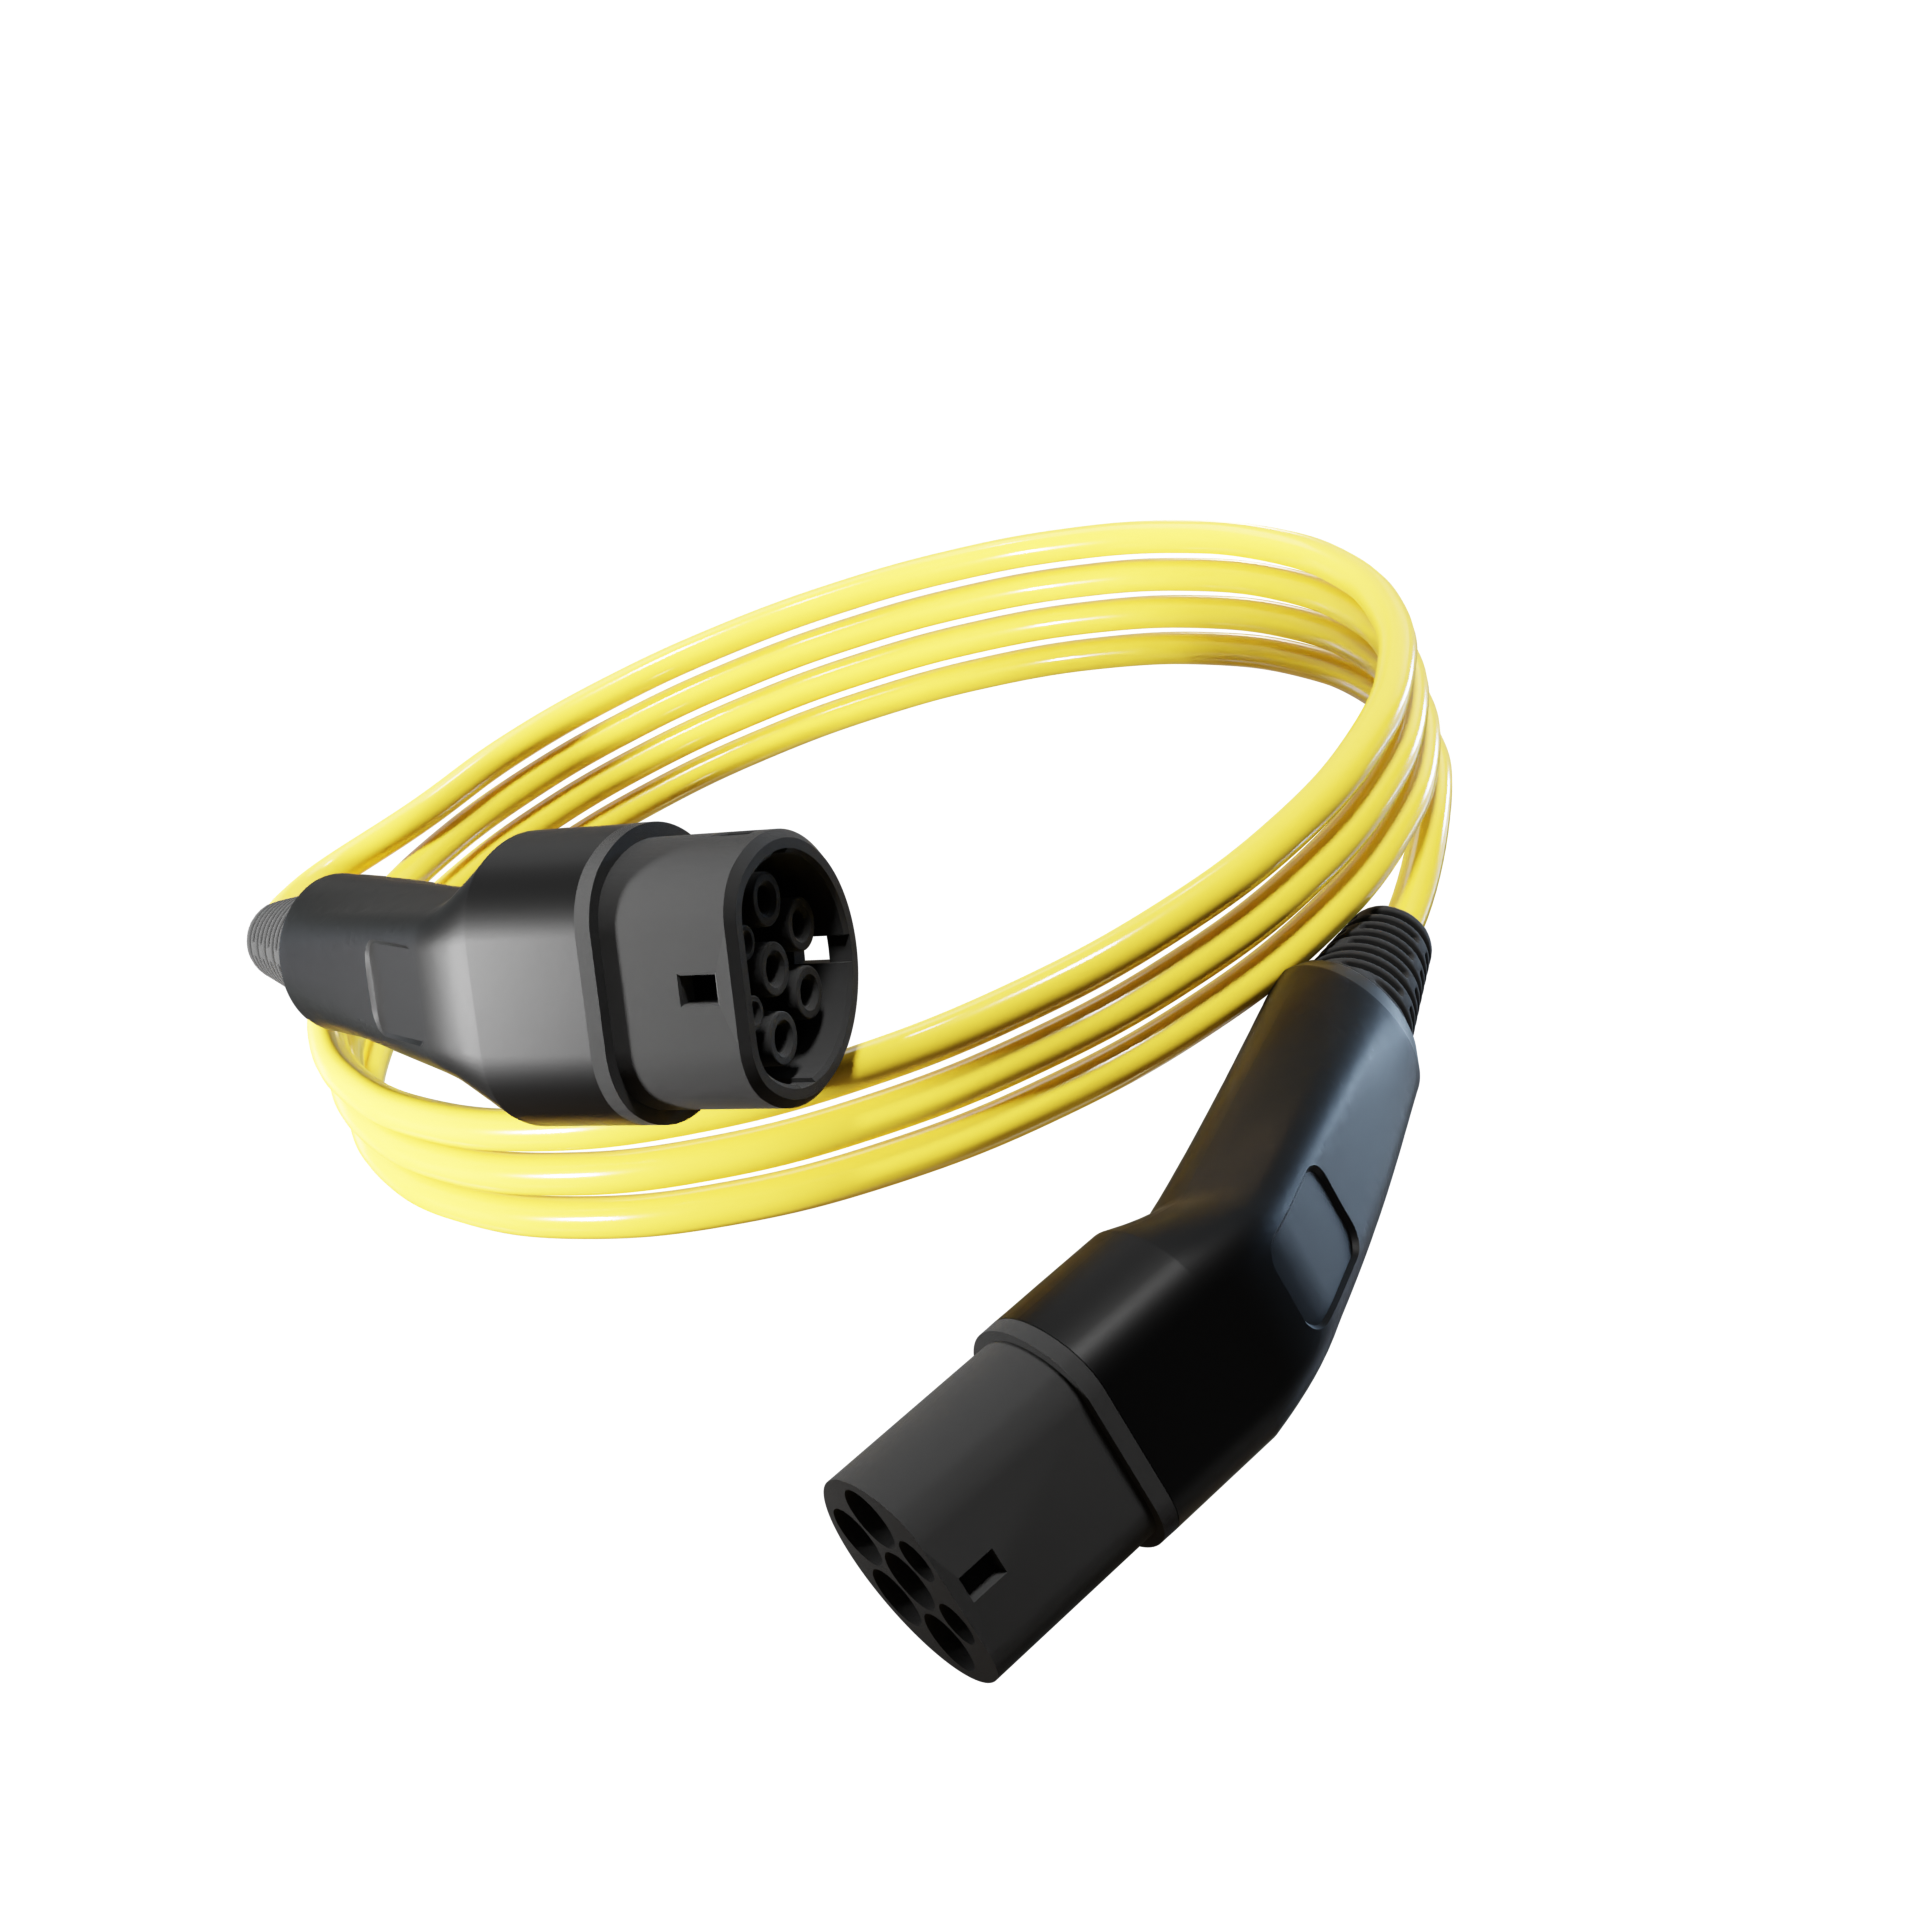 EV Public Charging Cable | Type 2 to Type 2